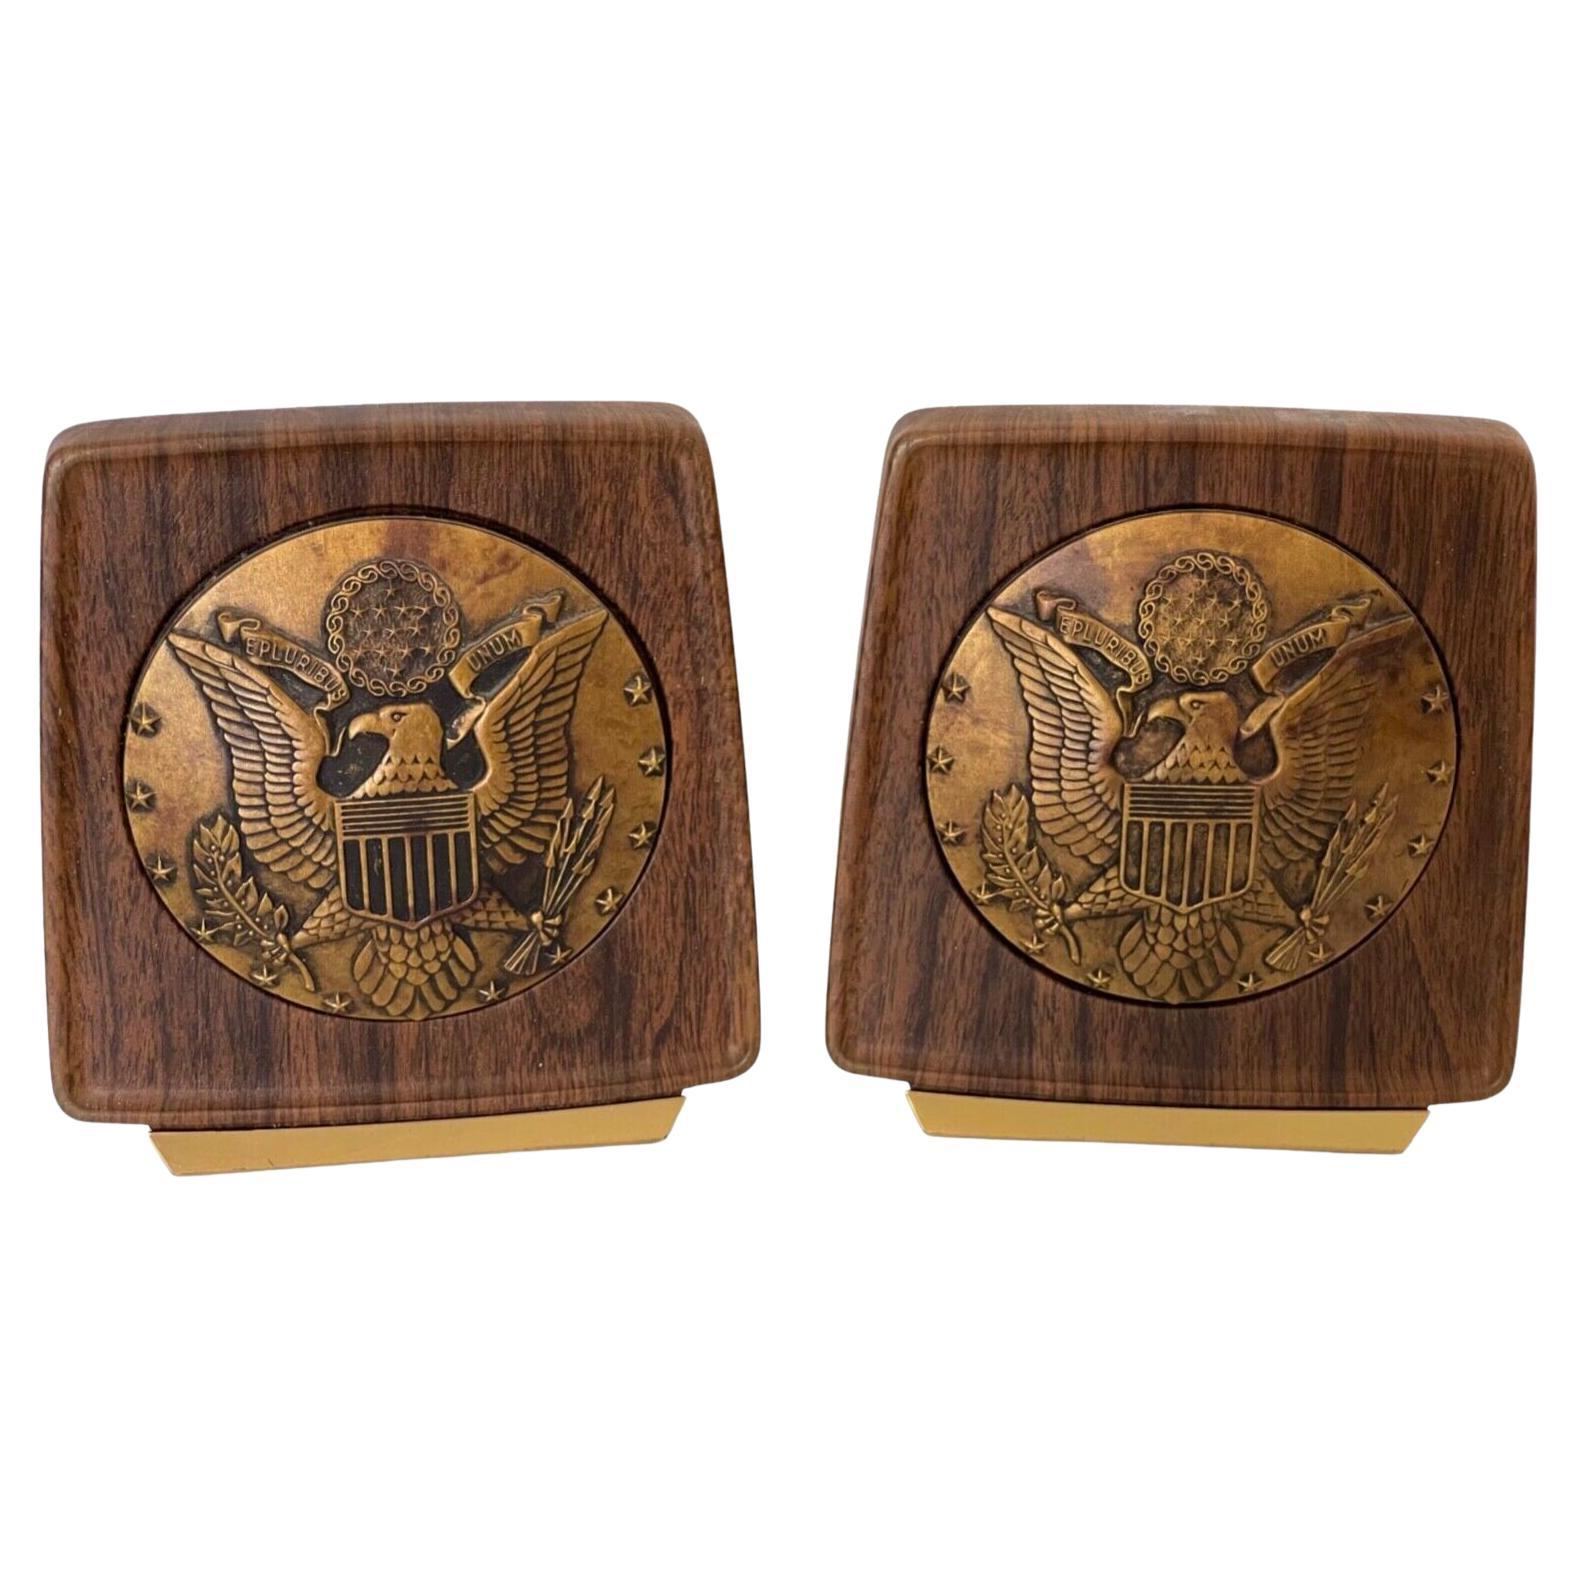 Vintage U.S. Great Seal Brass and Wood Bookends, Circa 1950s